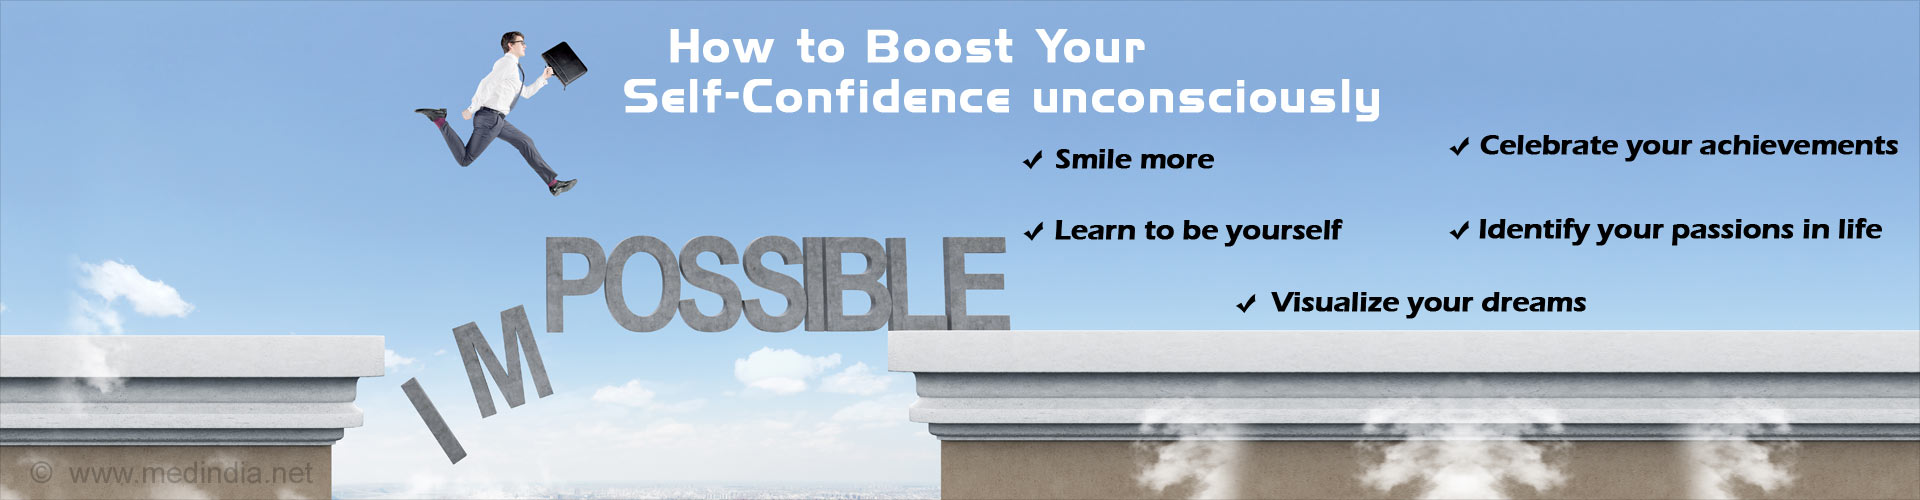 How to Boost Your Self-Confidence Unconsciously

- Smile more
- Learn to be yourself
- Celebrate your achievements
- Identify your passions in life
- Visualize your dreams
